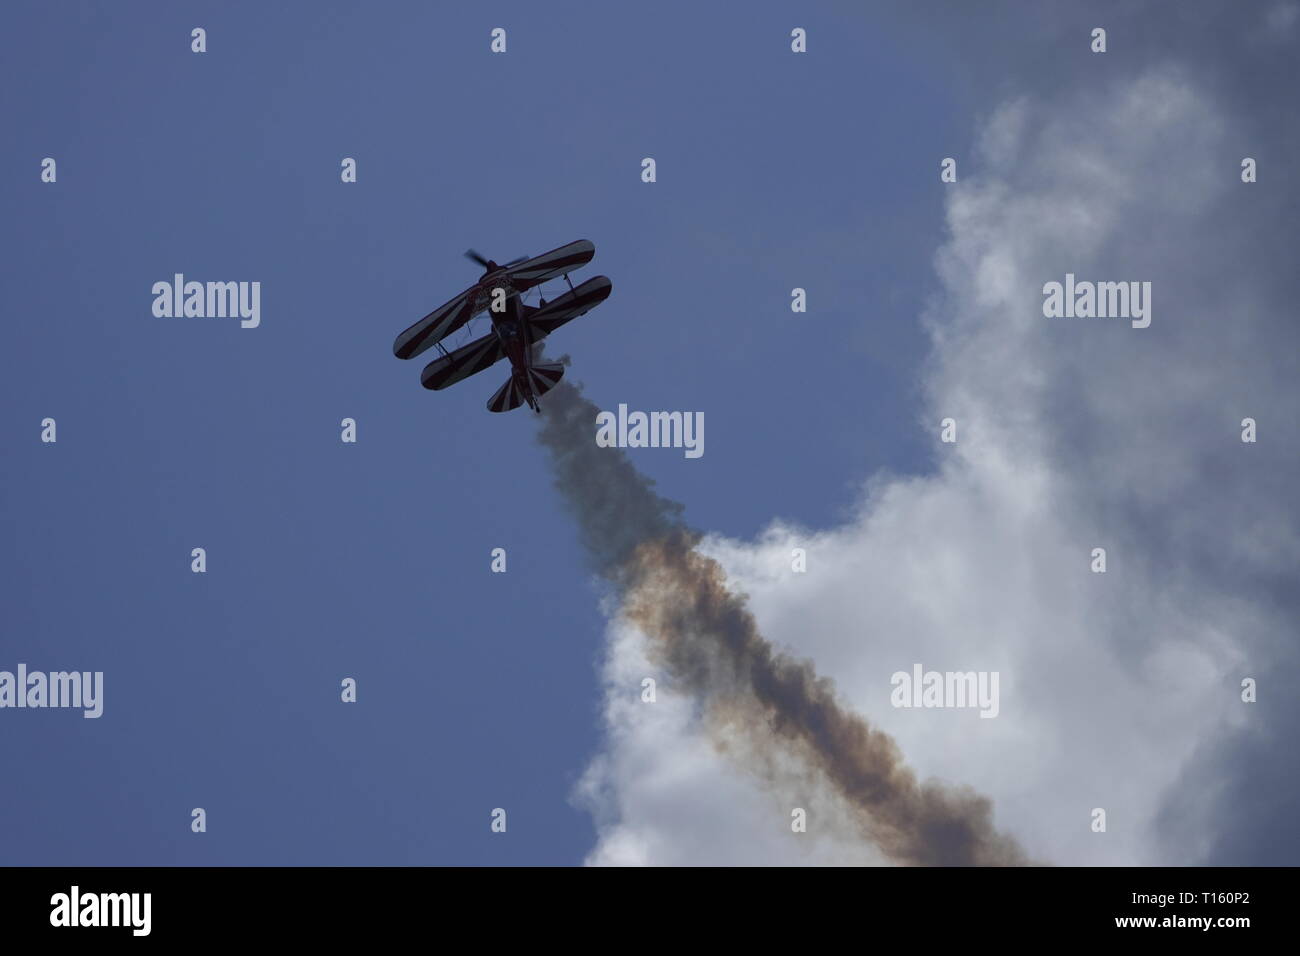 California, USA. 23rd Mar, 2019. 23rd March, 2019   Salinas, California, USA      Scenes from the annual  Salinas Air-Show, featuring the US Navy 'Blue Angels' arobatic team. Here Yuichi Takagi, US based, japanese aerobatic, pilot puts his Red Fox Team's Pitts special through it's paces Credit: Motofoto/Alamy Live News Stock Photo